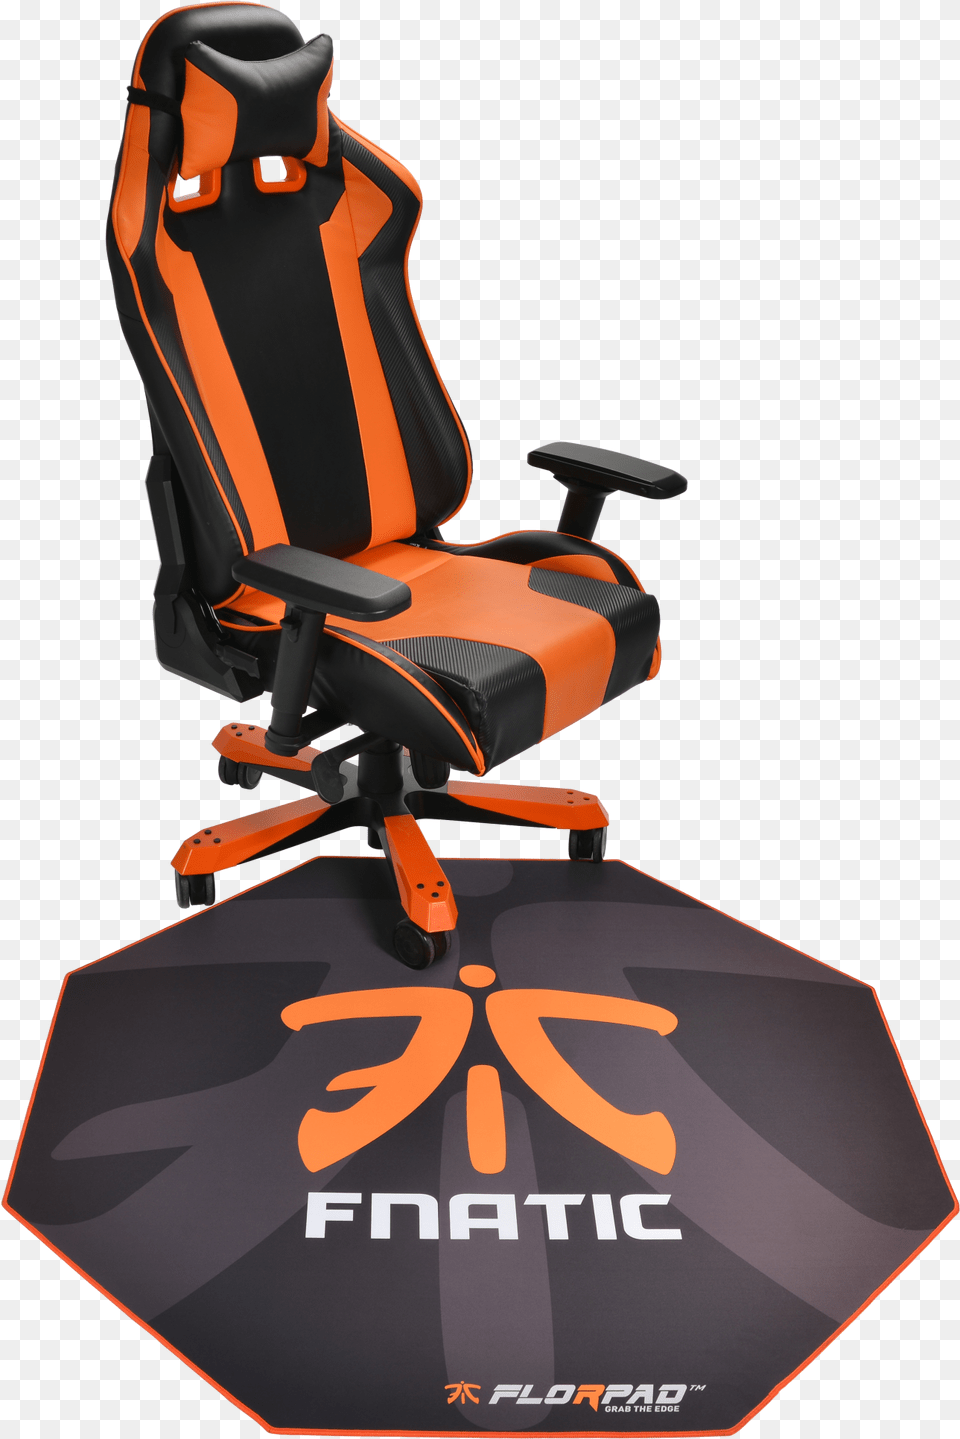 Download Florpad Fnatic Gamer Fnatic Gaming Chair, Cushion, Home Decor, Furniture Png Image